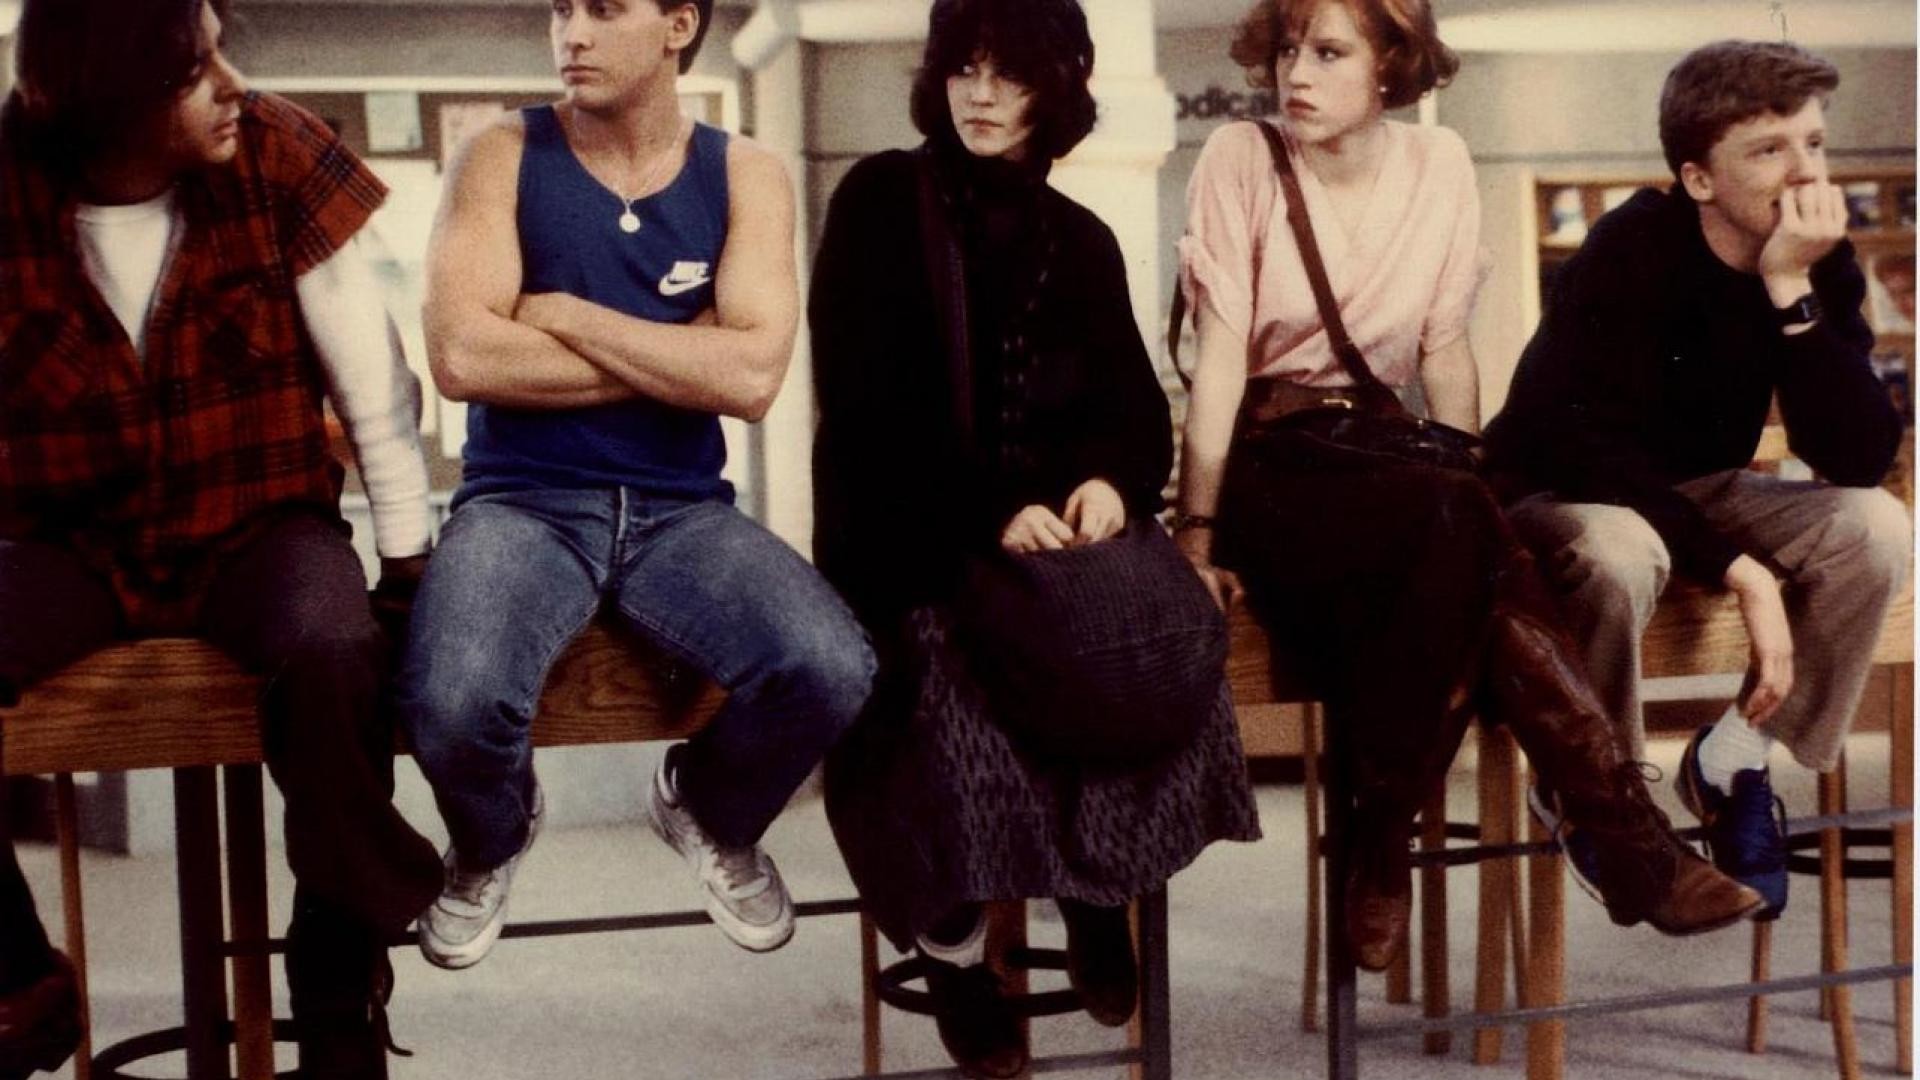 Pin by Marcelle Dias on Wallpapers  Breakfast club movie The breakfast  club Aesthetic movies